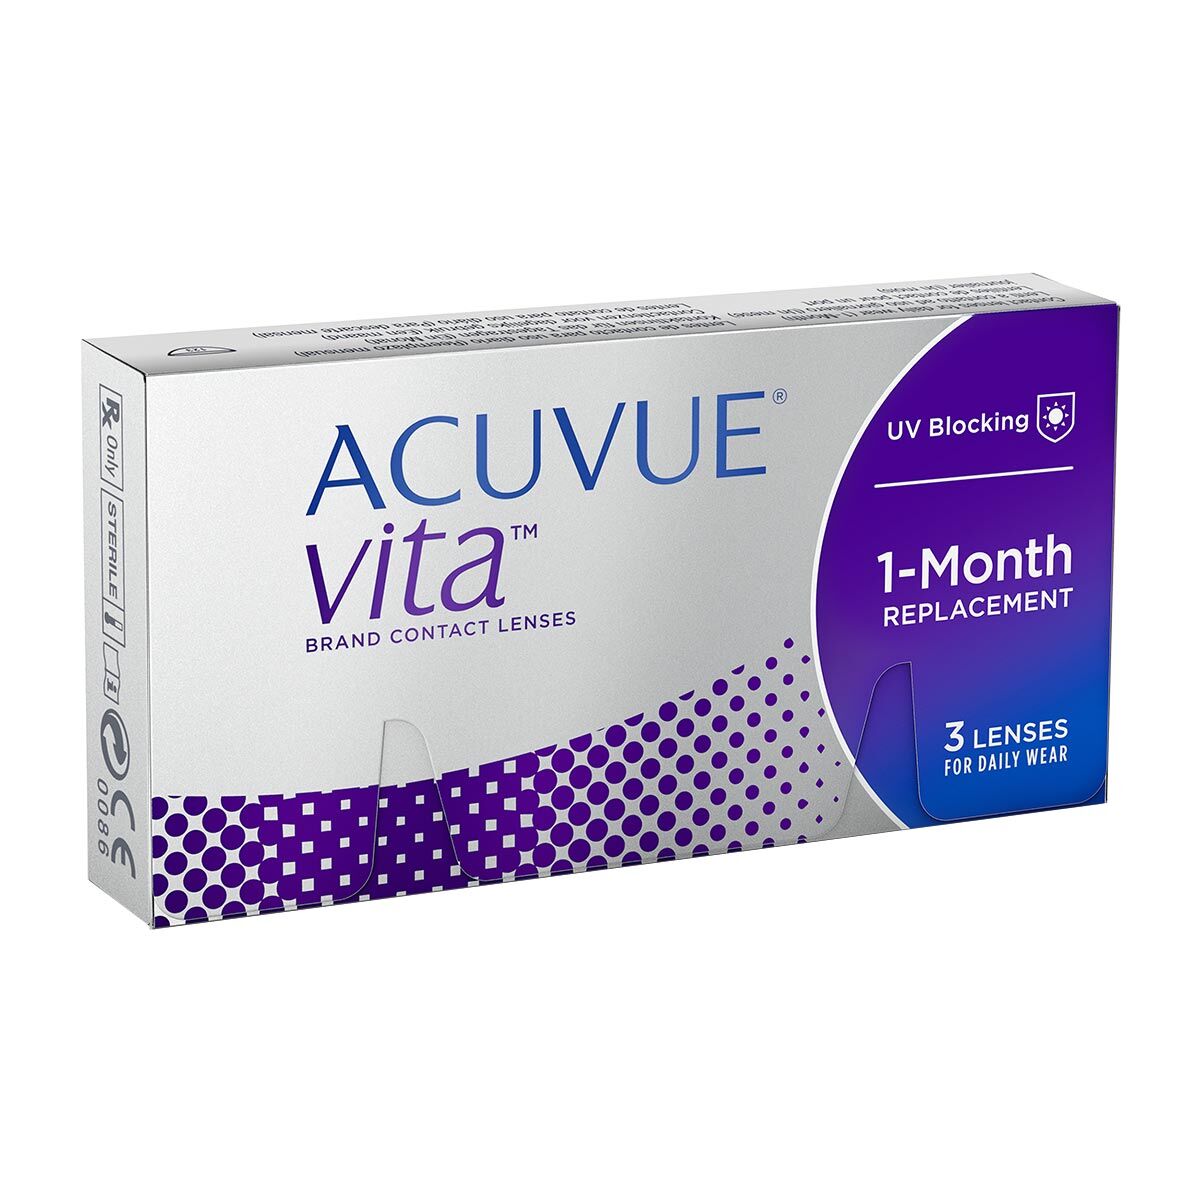 Acuvue Vita (3 Contact Lenses), Monthly Disposables by Johnson & Johnson, Silicone Hydrogel